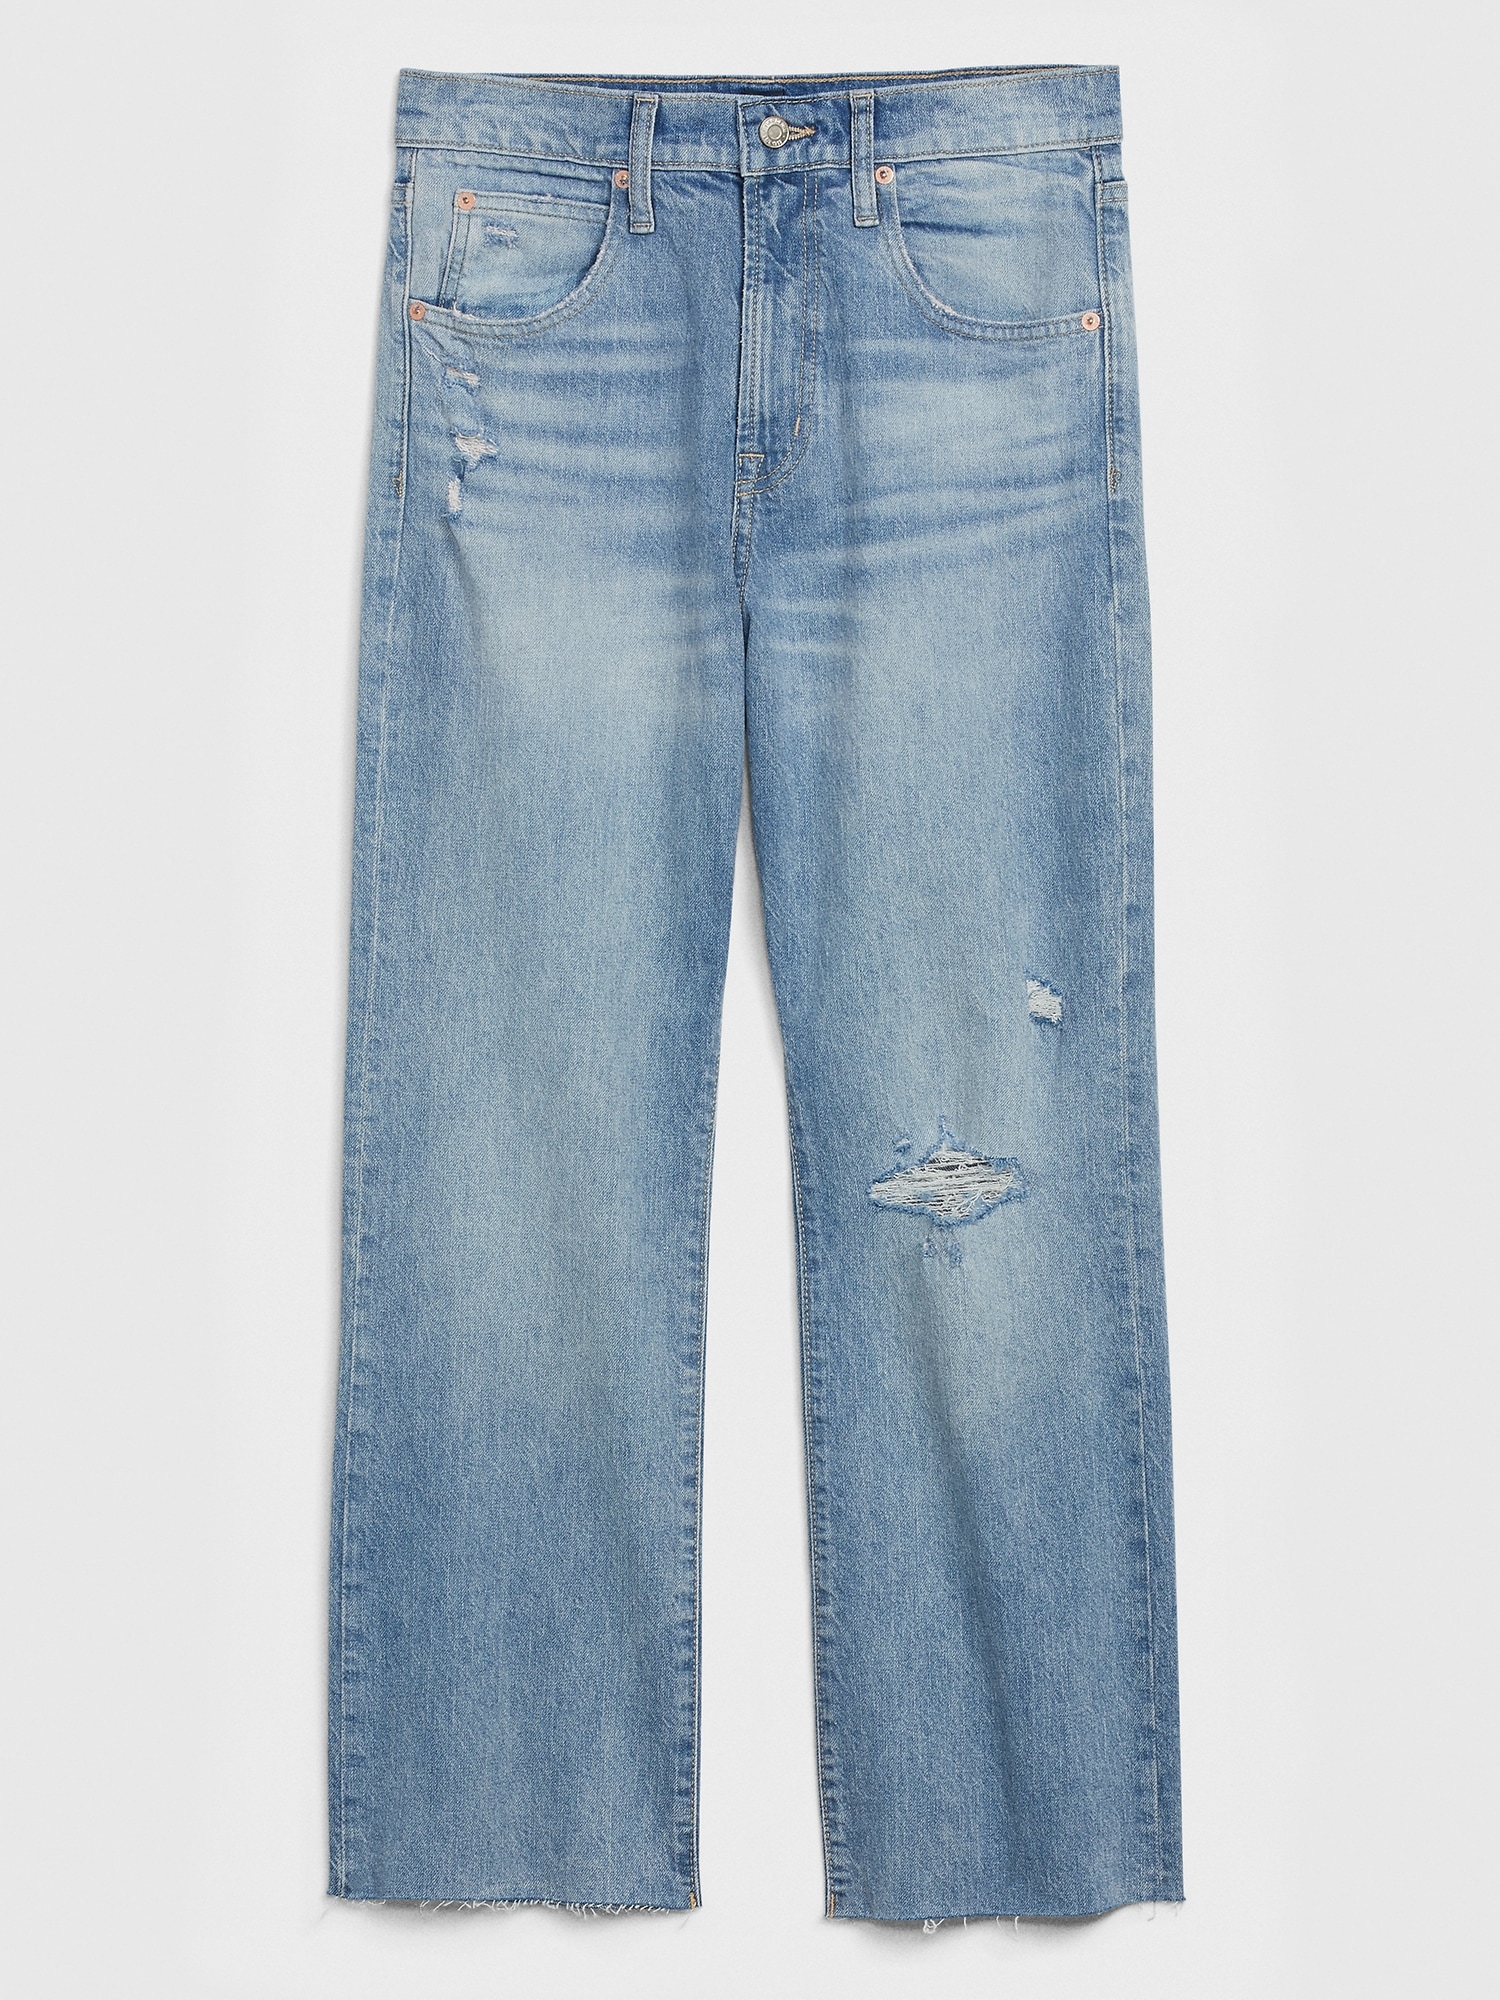 levi strauss & co signature jeans womens